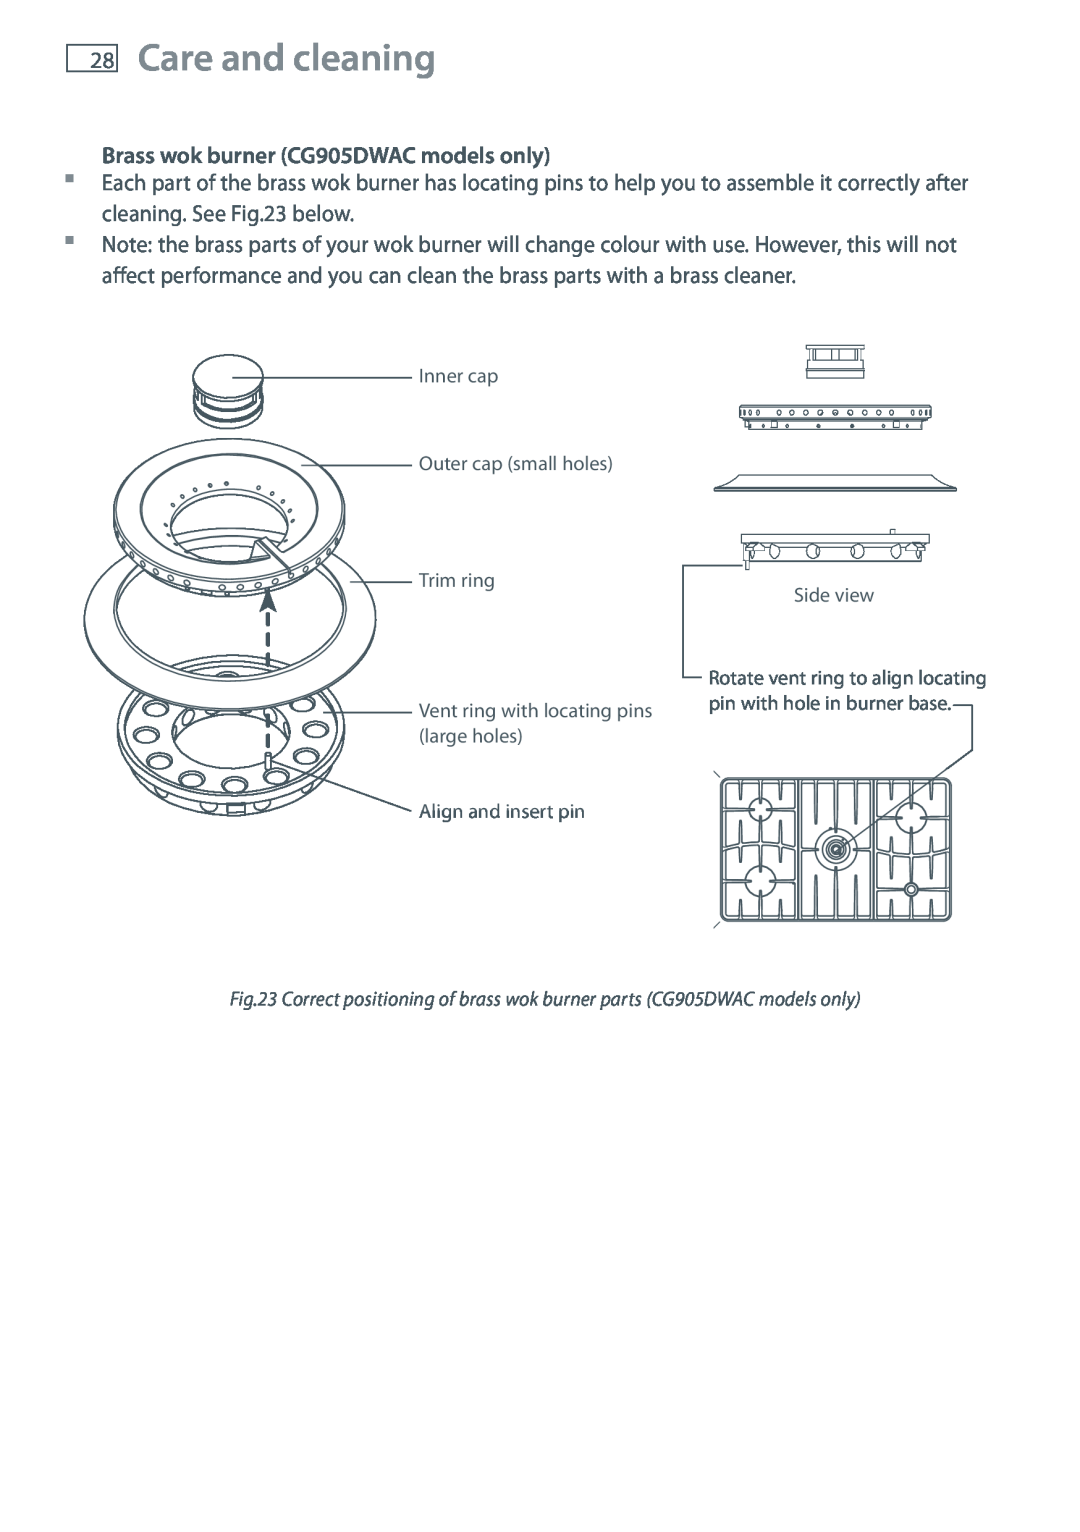 Fisher & Paykel installation instructions Care and cleaning, Brass wok burner CG905DWAC models only 